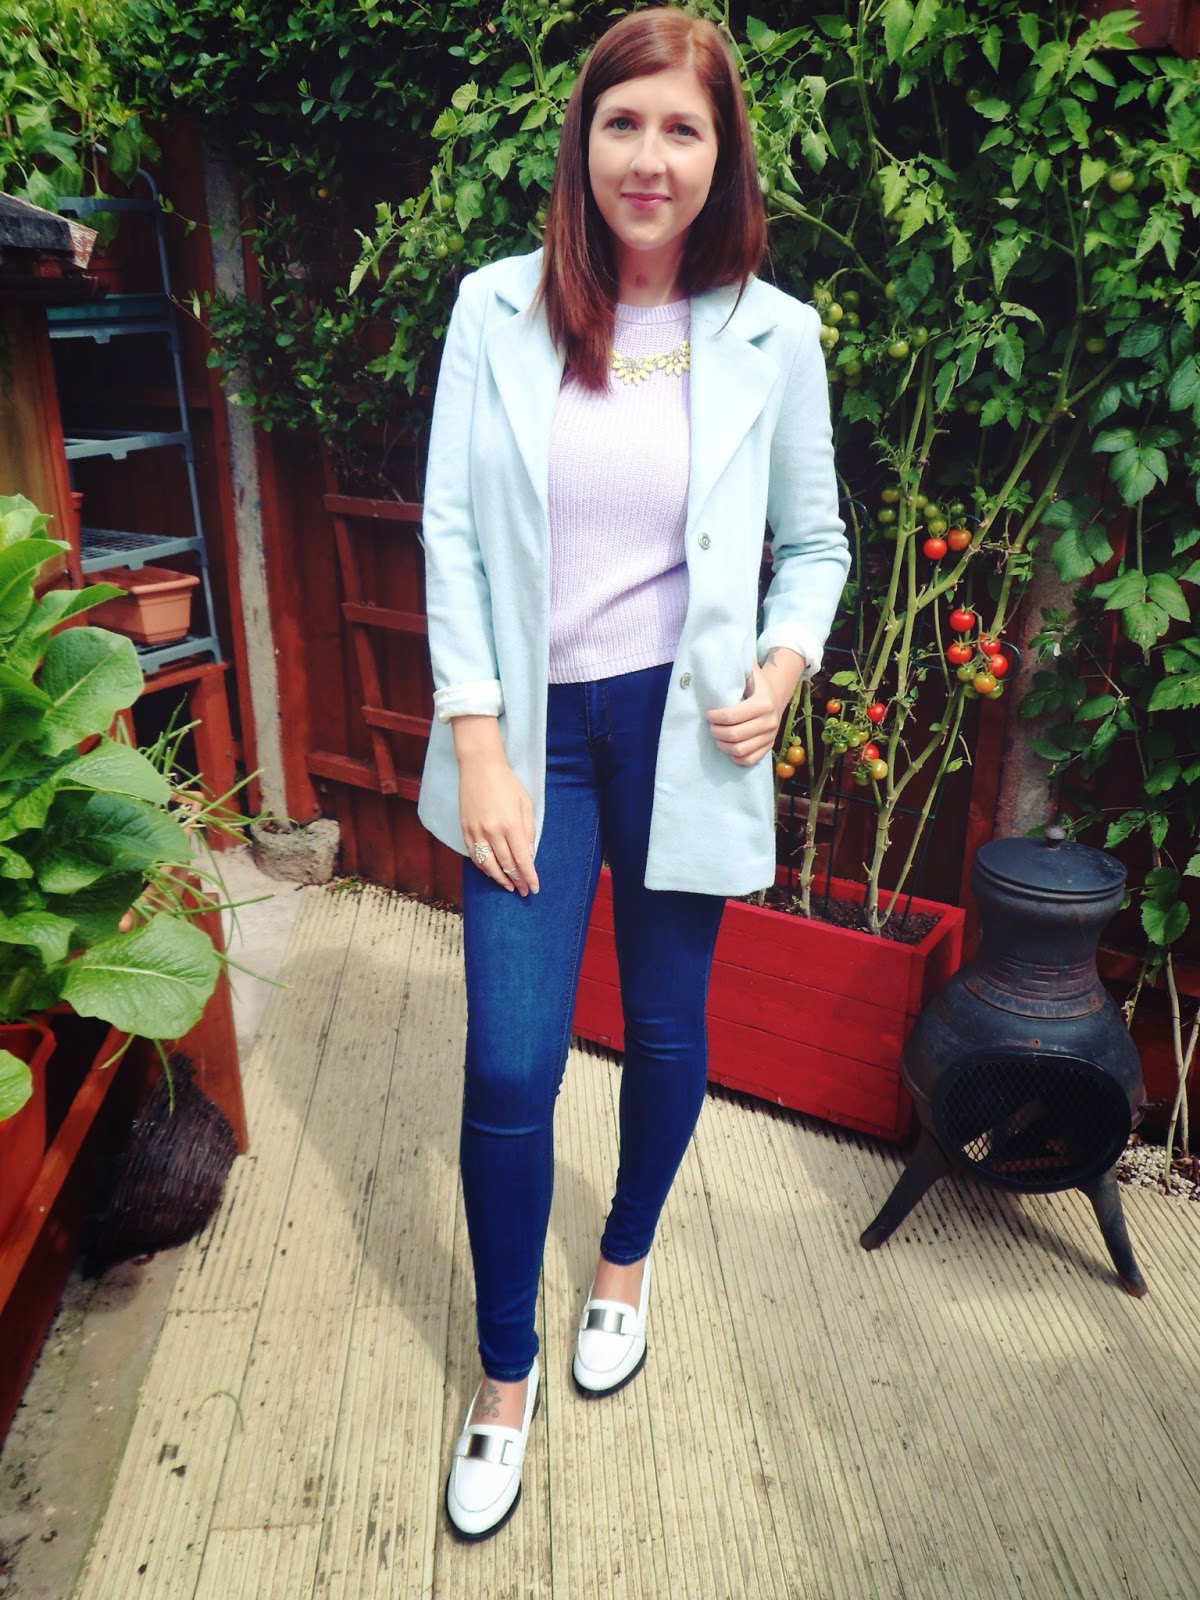 androgyny, pastels, asos, primark, skinny jeans, ootd, boyfriends coat, lilac, blue, leather, Autumn/ Winter 2014, autumn, winter, outfitoftheday, win, whatimwearing, whatibought, asseenonme, fbloggers, fashionbloggers